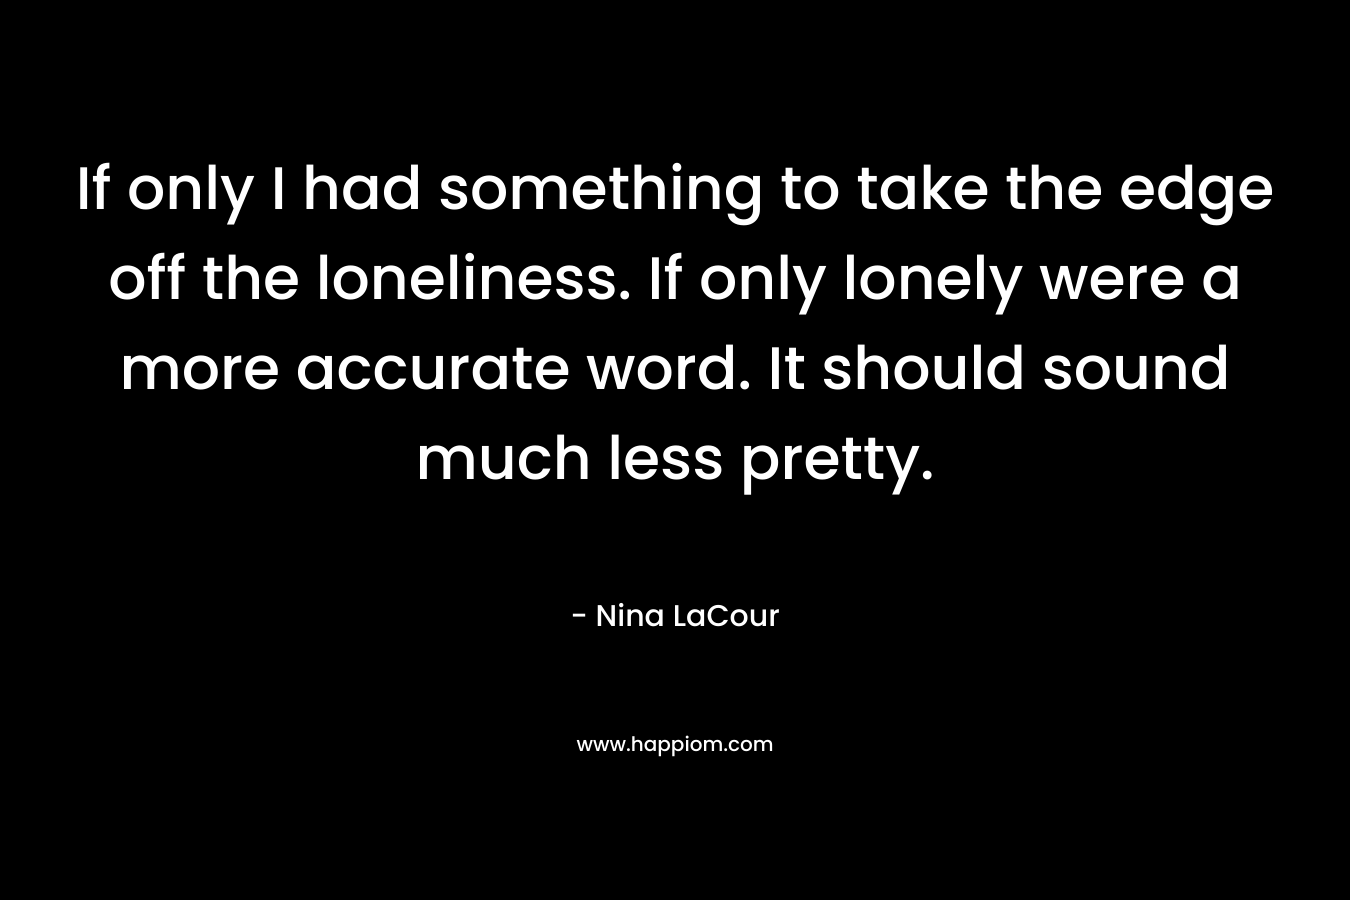 If only I had something to take the edge off the loneliness. If only lonely were a more accurate word. It should sound much less pretty.